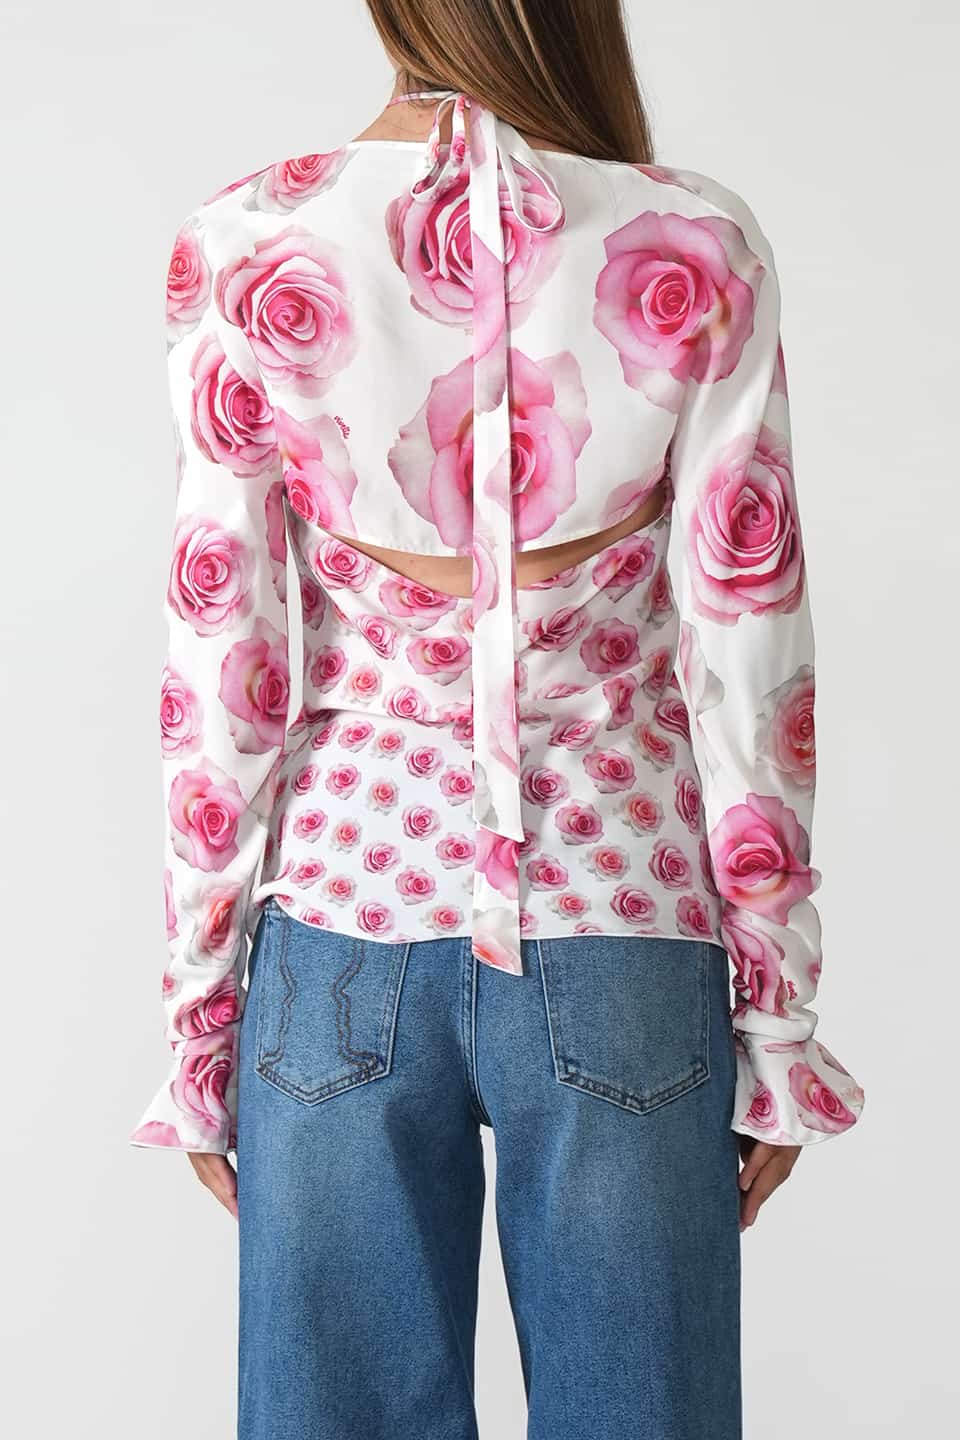 Thumbnail for Product gallery 7, Rose Print Blouse